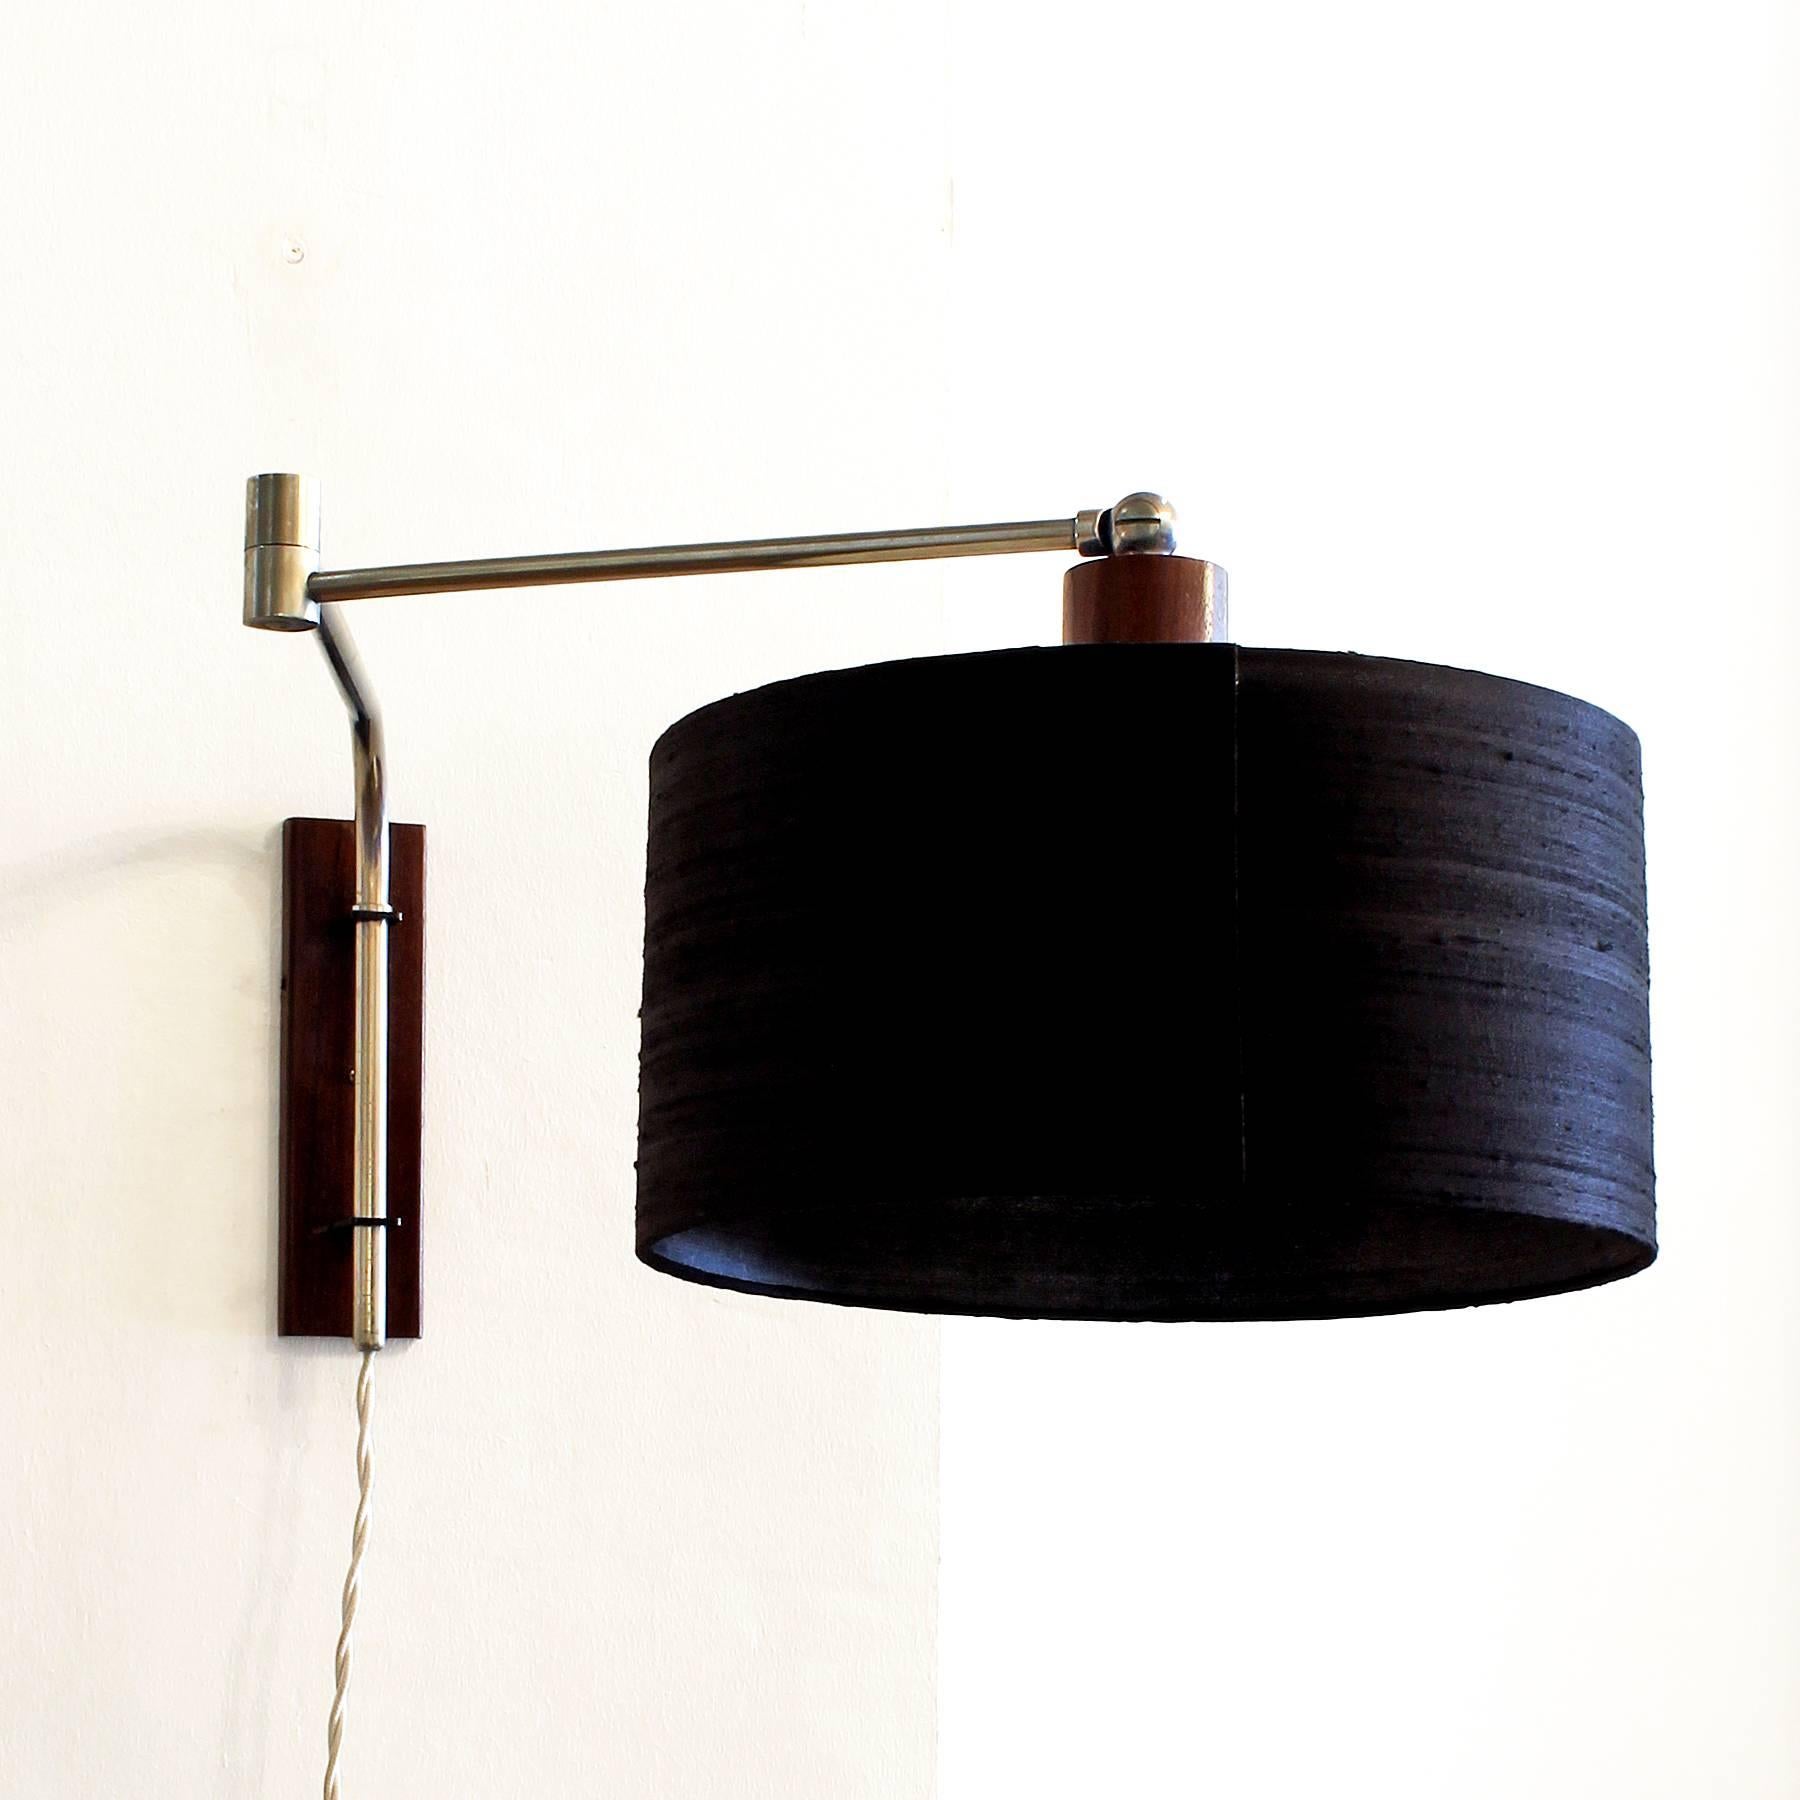 Pair of large wall lights, nickel-plated steel articulated arms, wood imitation lacquered metal, solid teak and black and white silk lampshades.
Maker: Dijkstra Lampen.

Netherlands, circa 1960.

Maximun length: 77 cm